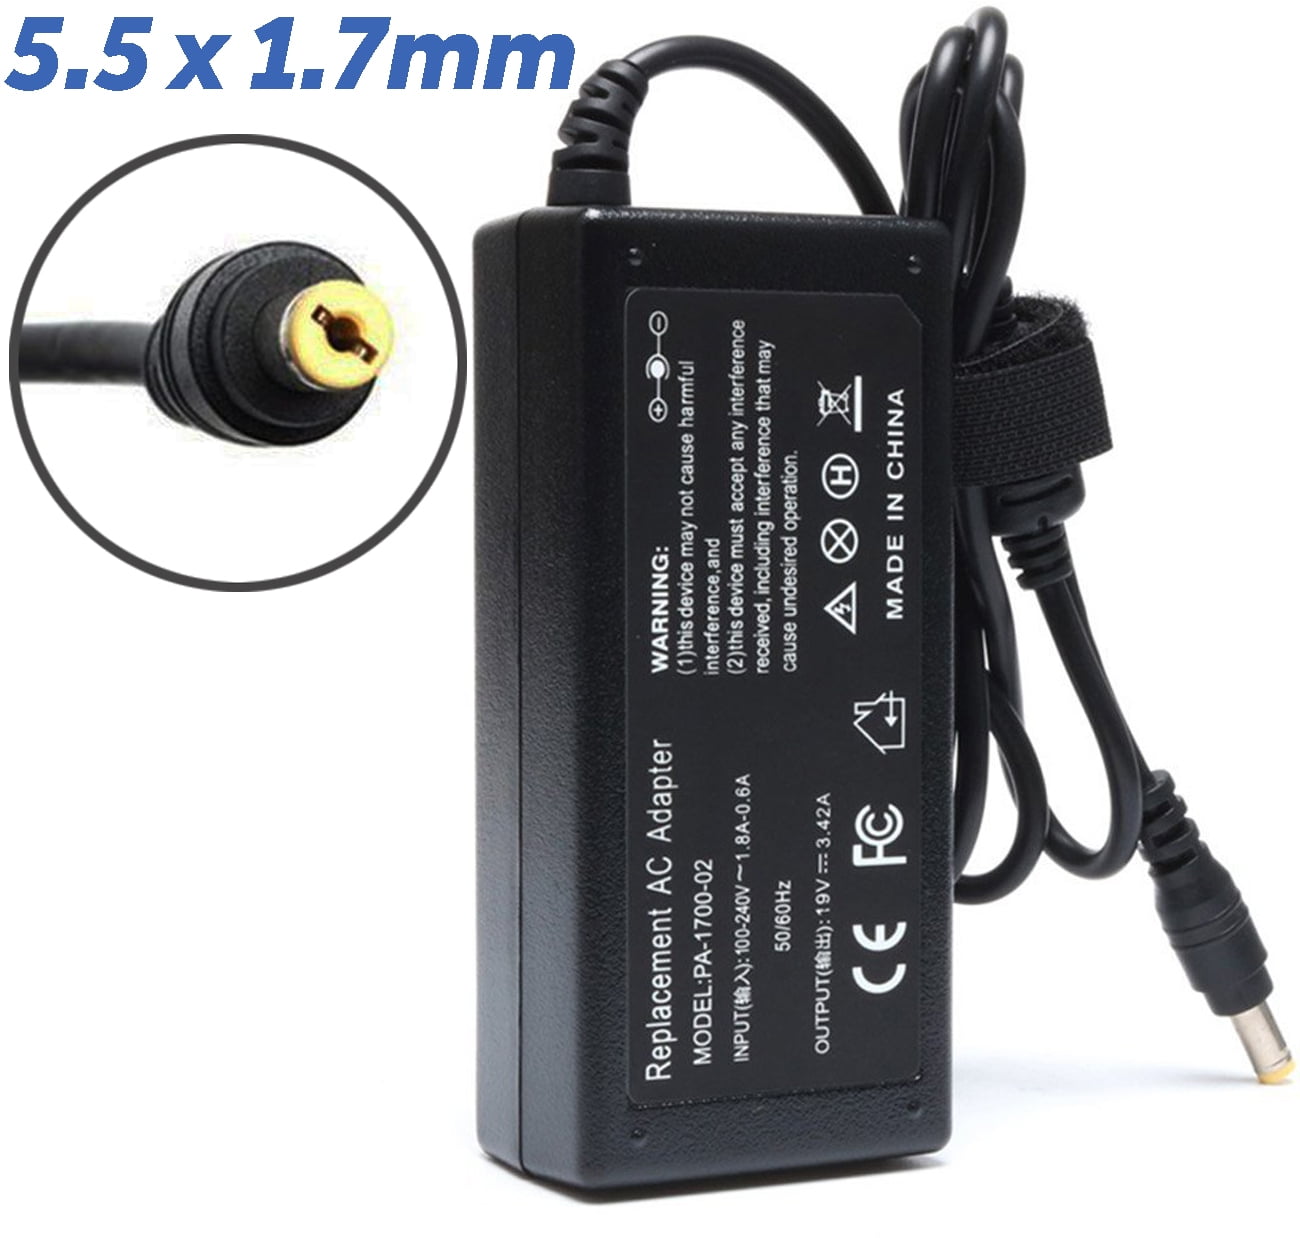 Pwr 19V AC Adapter Power-Supply for Acer-Monitor Charger UL Listed Extra Long Cord G226HQL G236HL G246HL G246HYL G276HL GN246HL H236HL S220HQL S230HL S231HL S240HL S242HL S271HL ADP-40PH BB DA-40A19